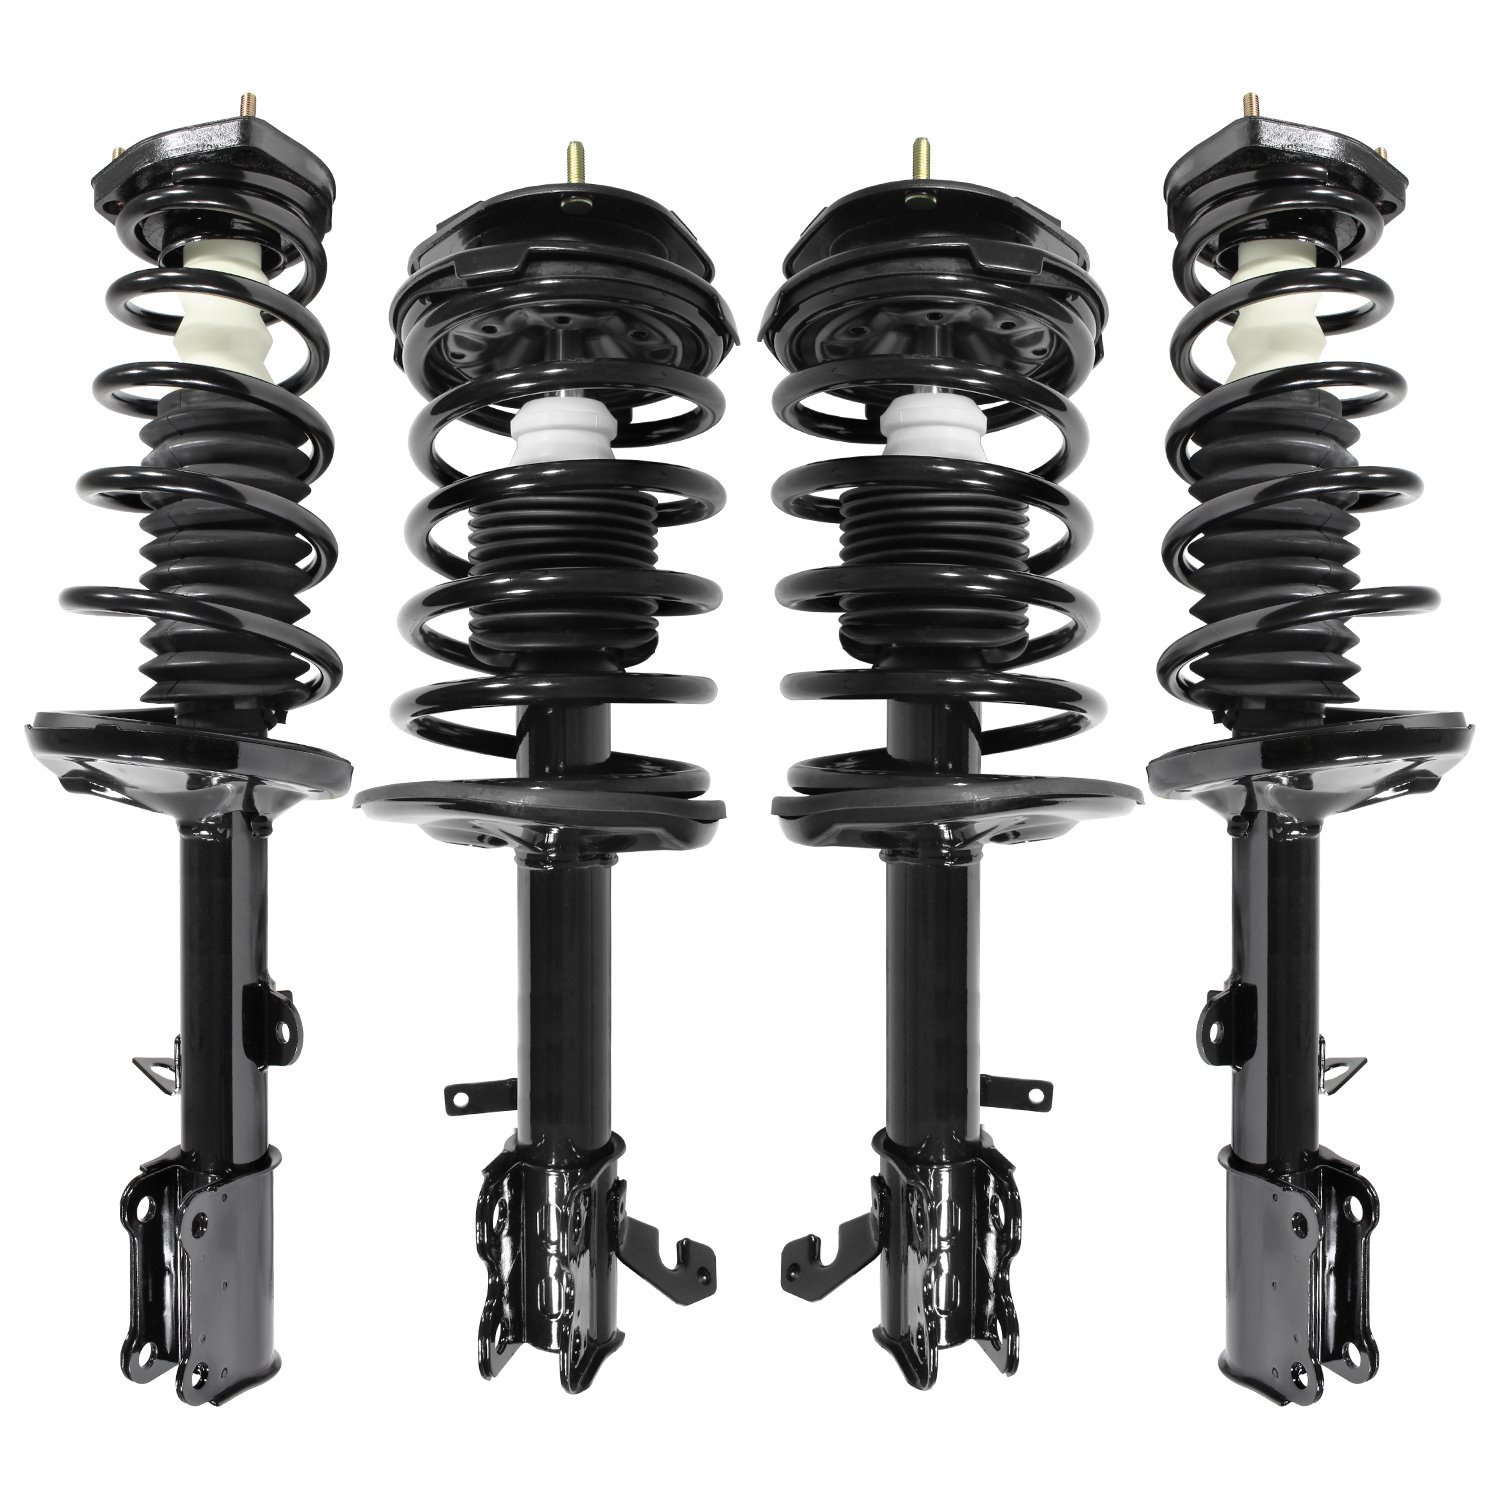 4-11151-15051-001 Front & Rear Suspension Strut & Coil Spring Assembly Kit Fits Select Chevy Prizm, Toyota Corolla